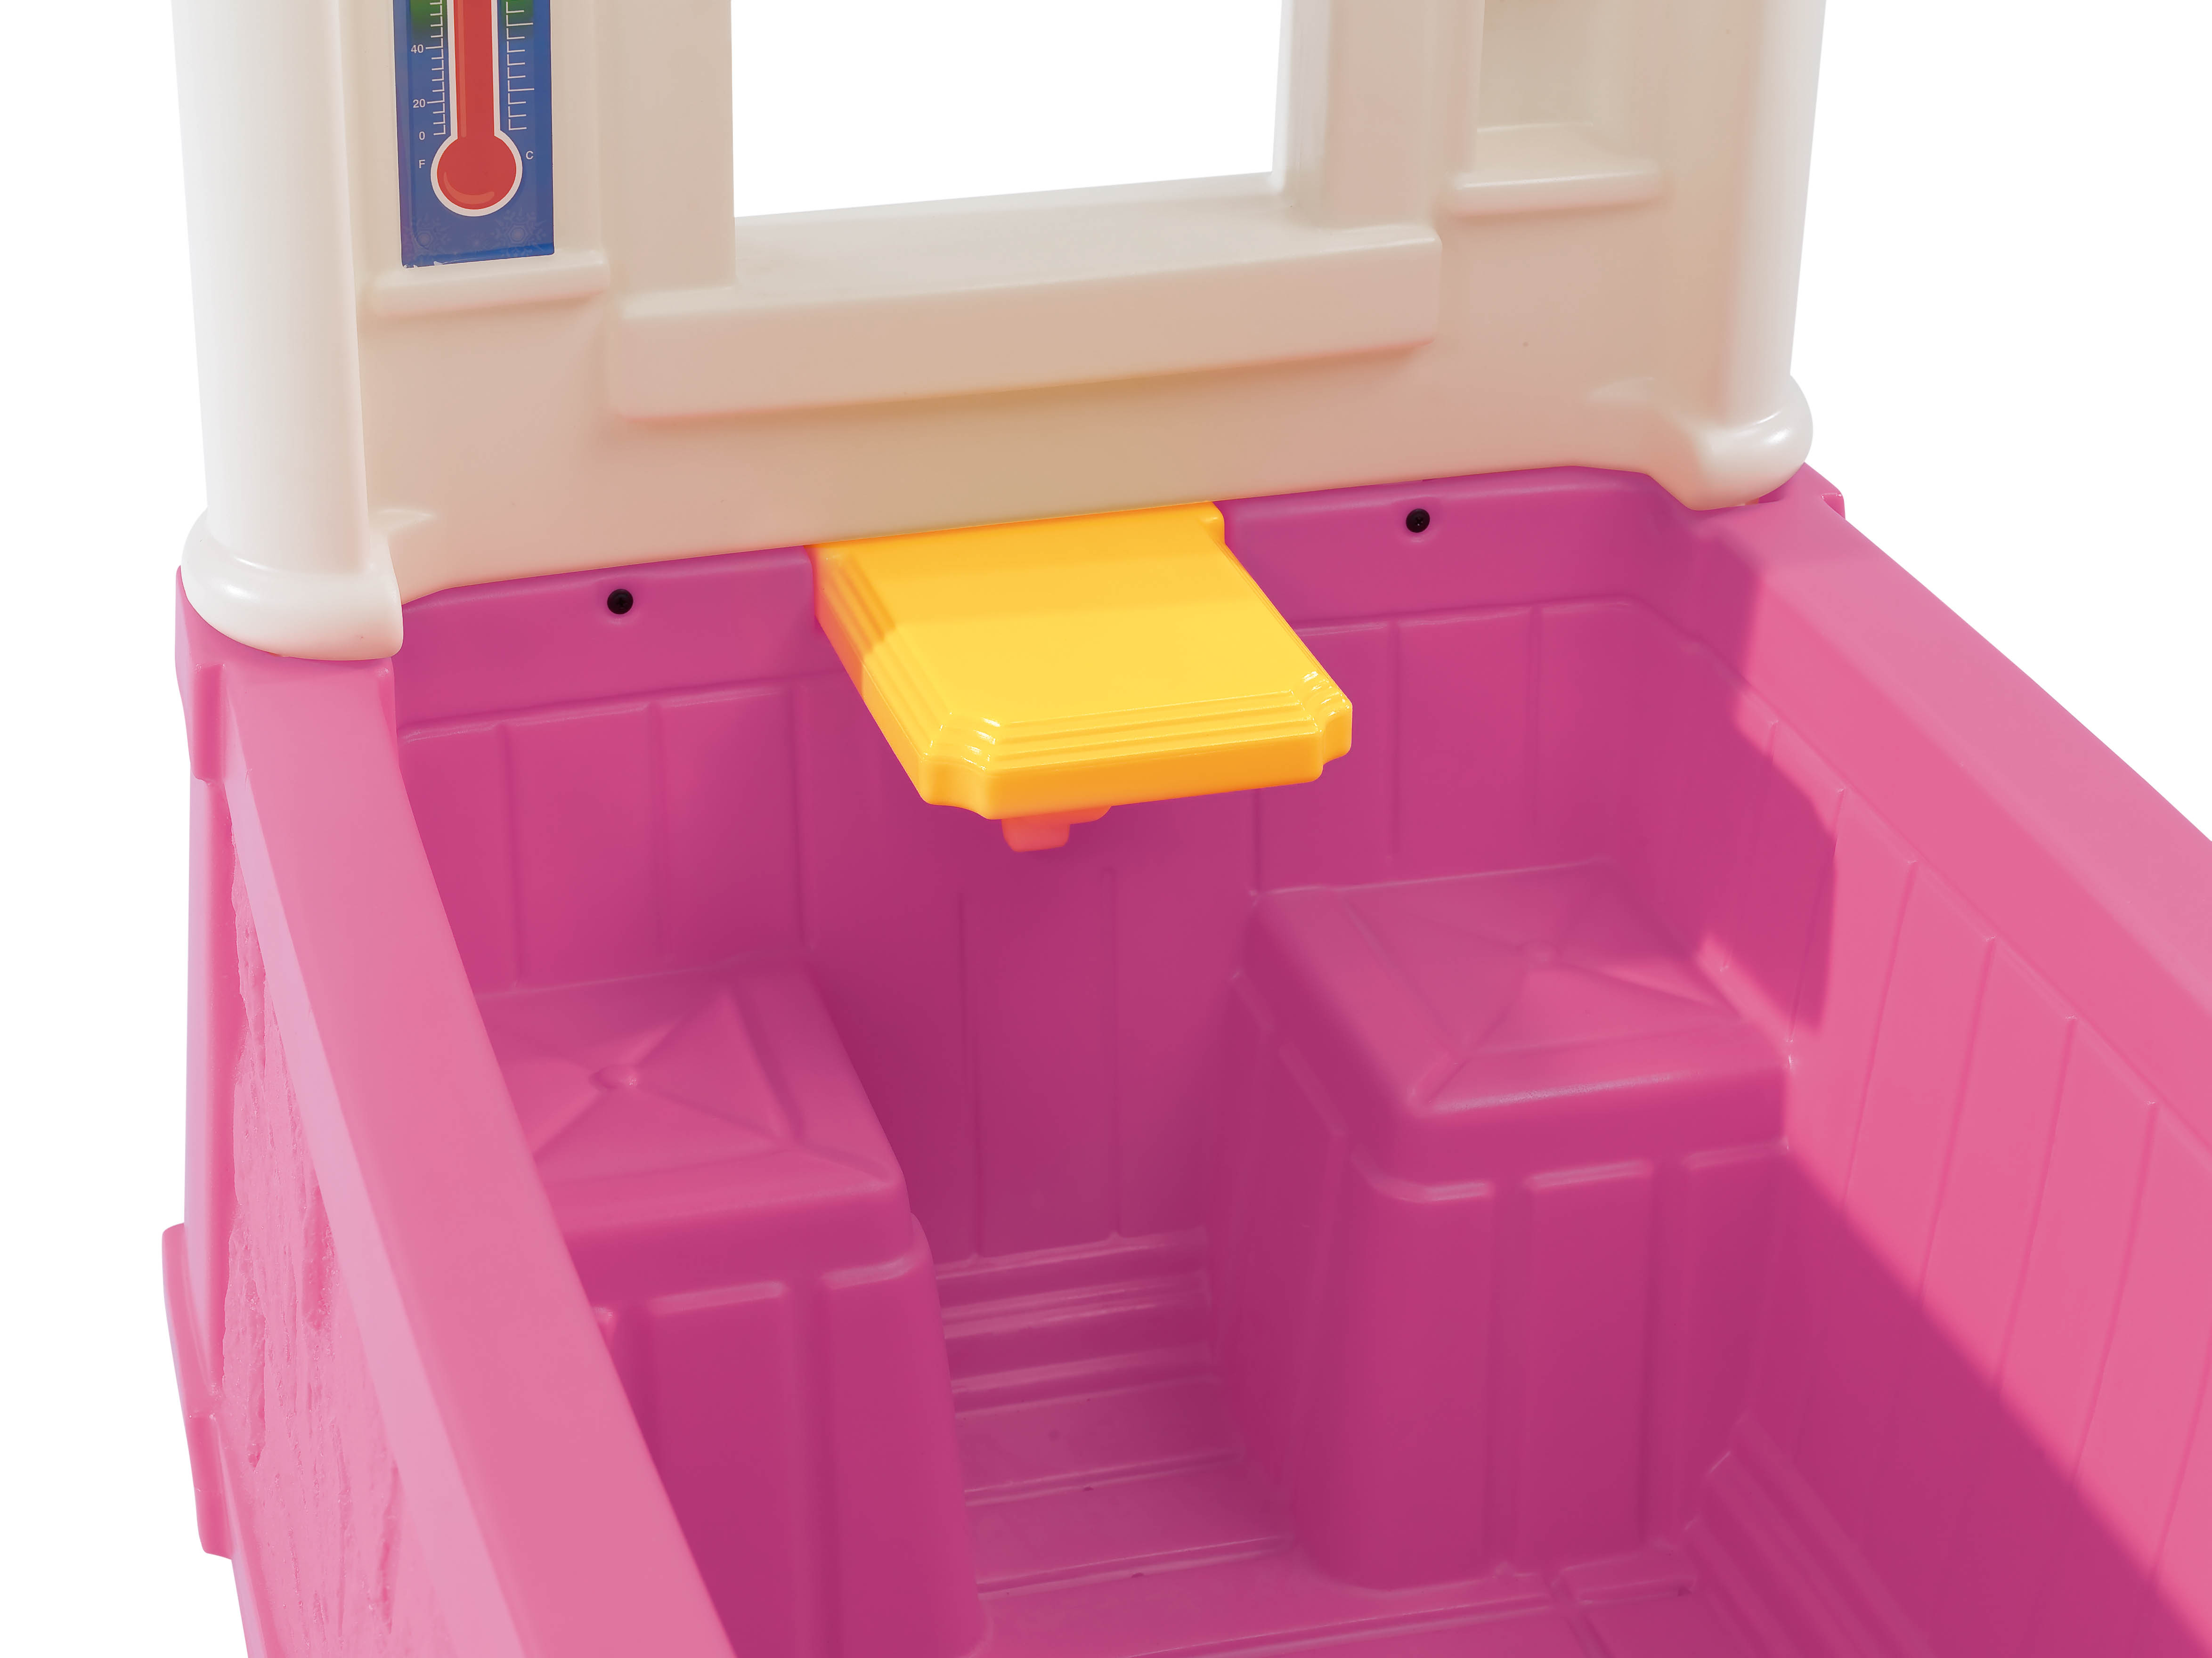 Step2 Four Seasons Pink and Purple Playhouse for Toddlers - image 2 of 4